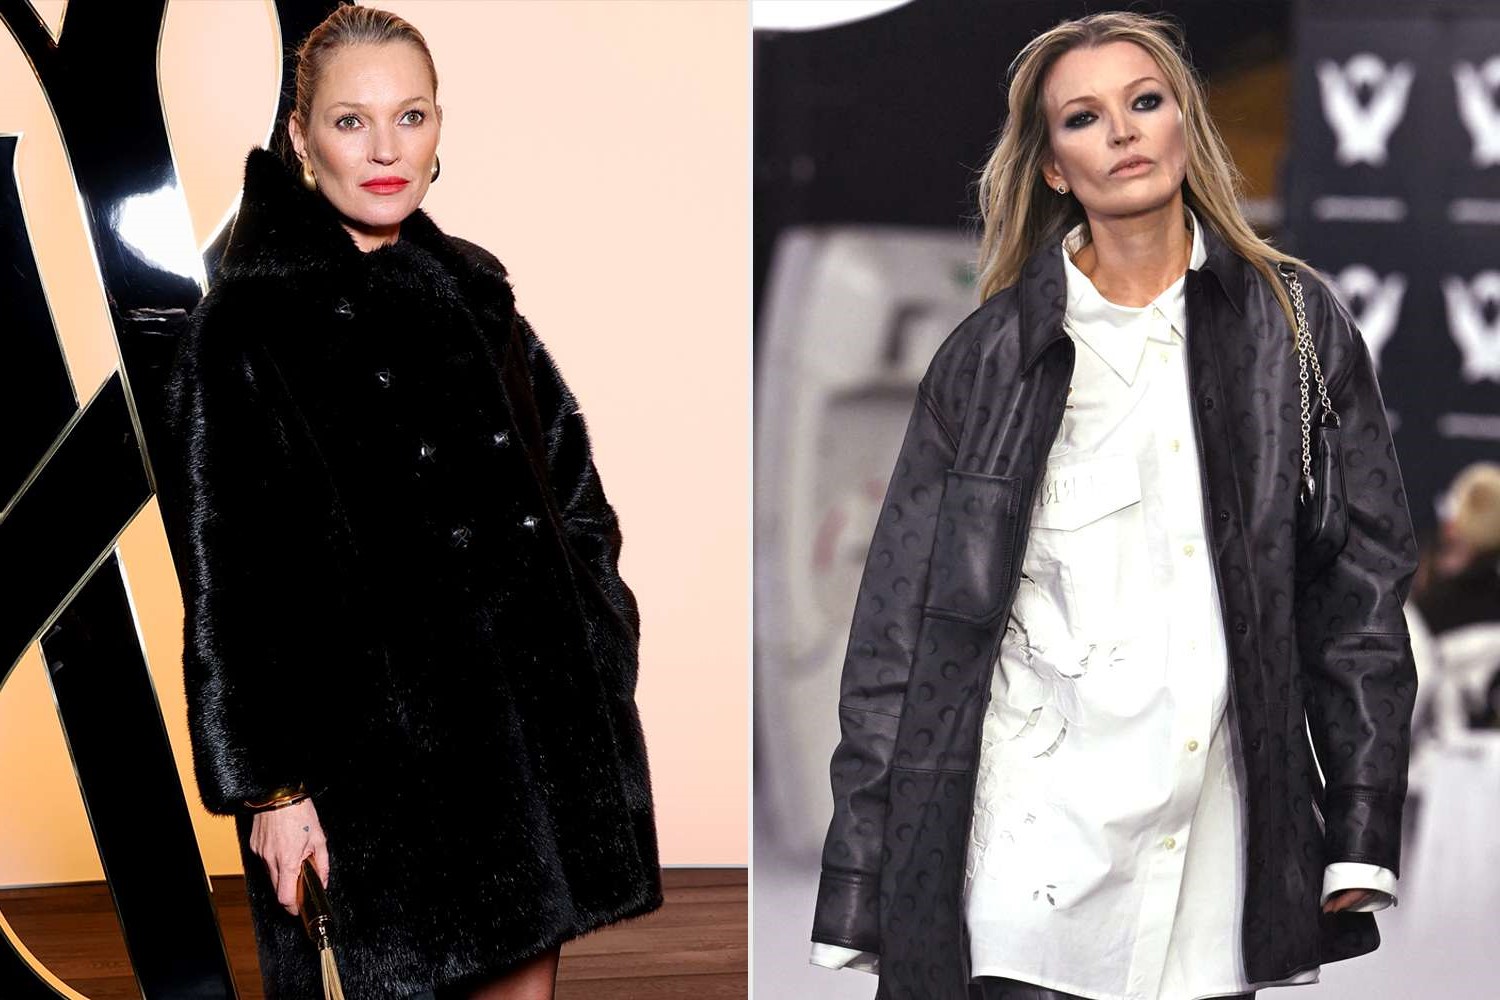 The Unbelievable Resemblance: Kate Moss Doppelgänger Takes Over Paris Fashion Week